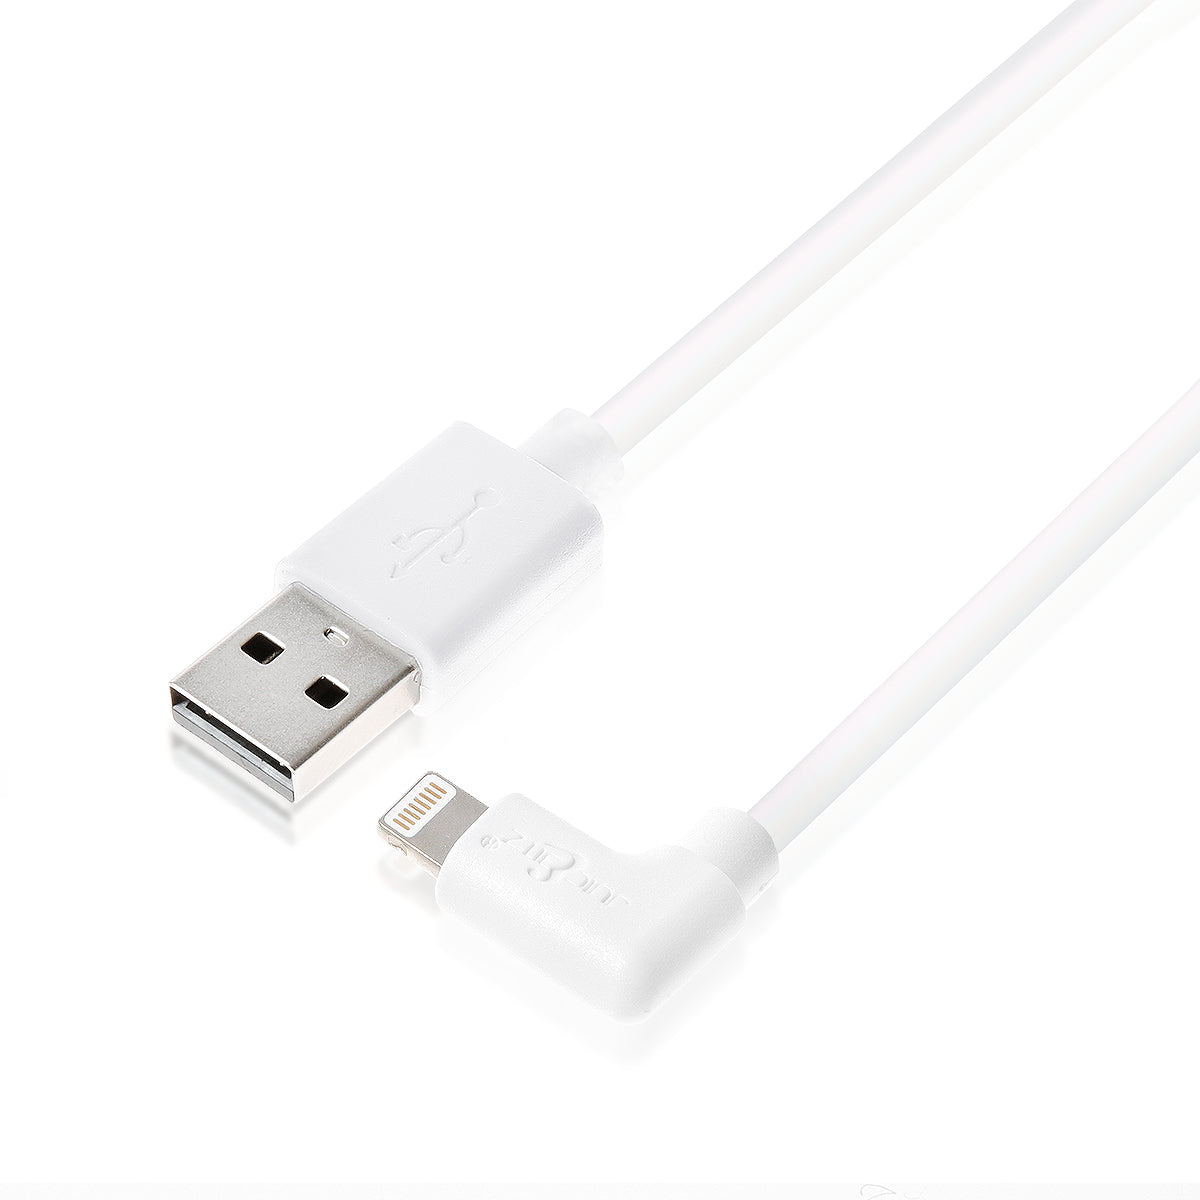 Heavy Duty Angled USB Charger Cable Data Sync Lead for iPhone, iPad, iPod - White